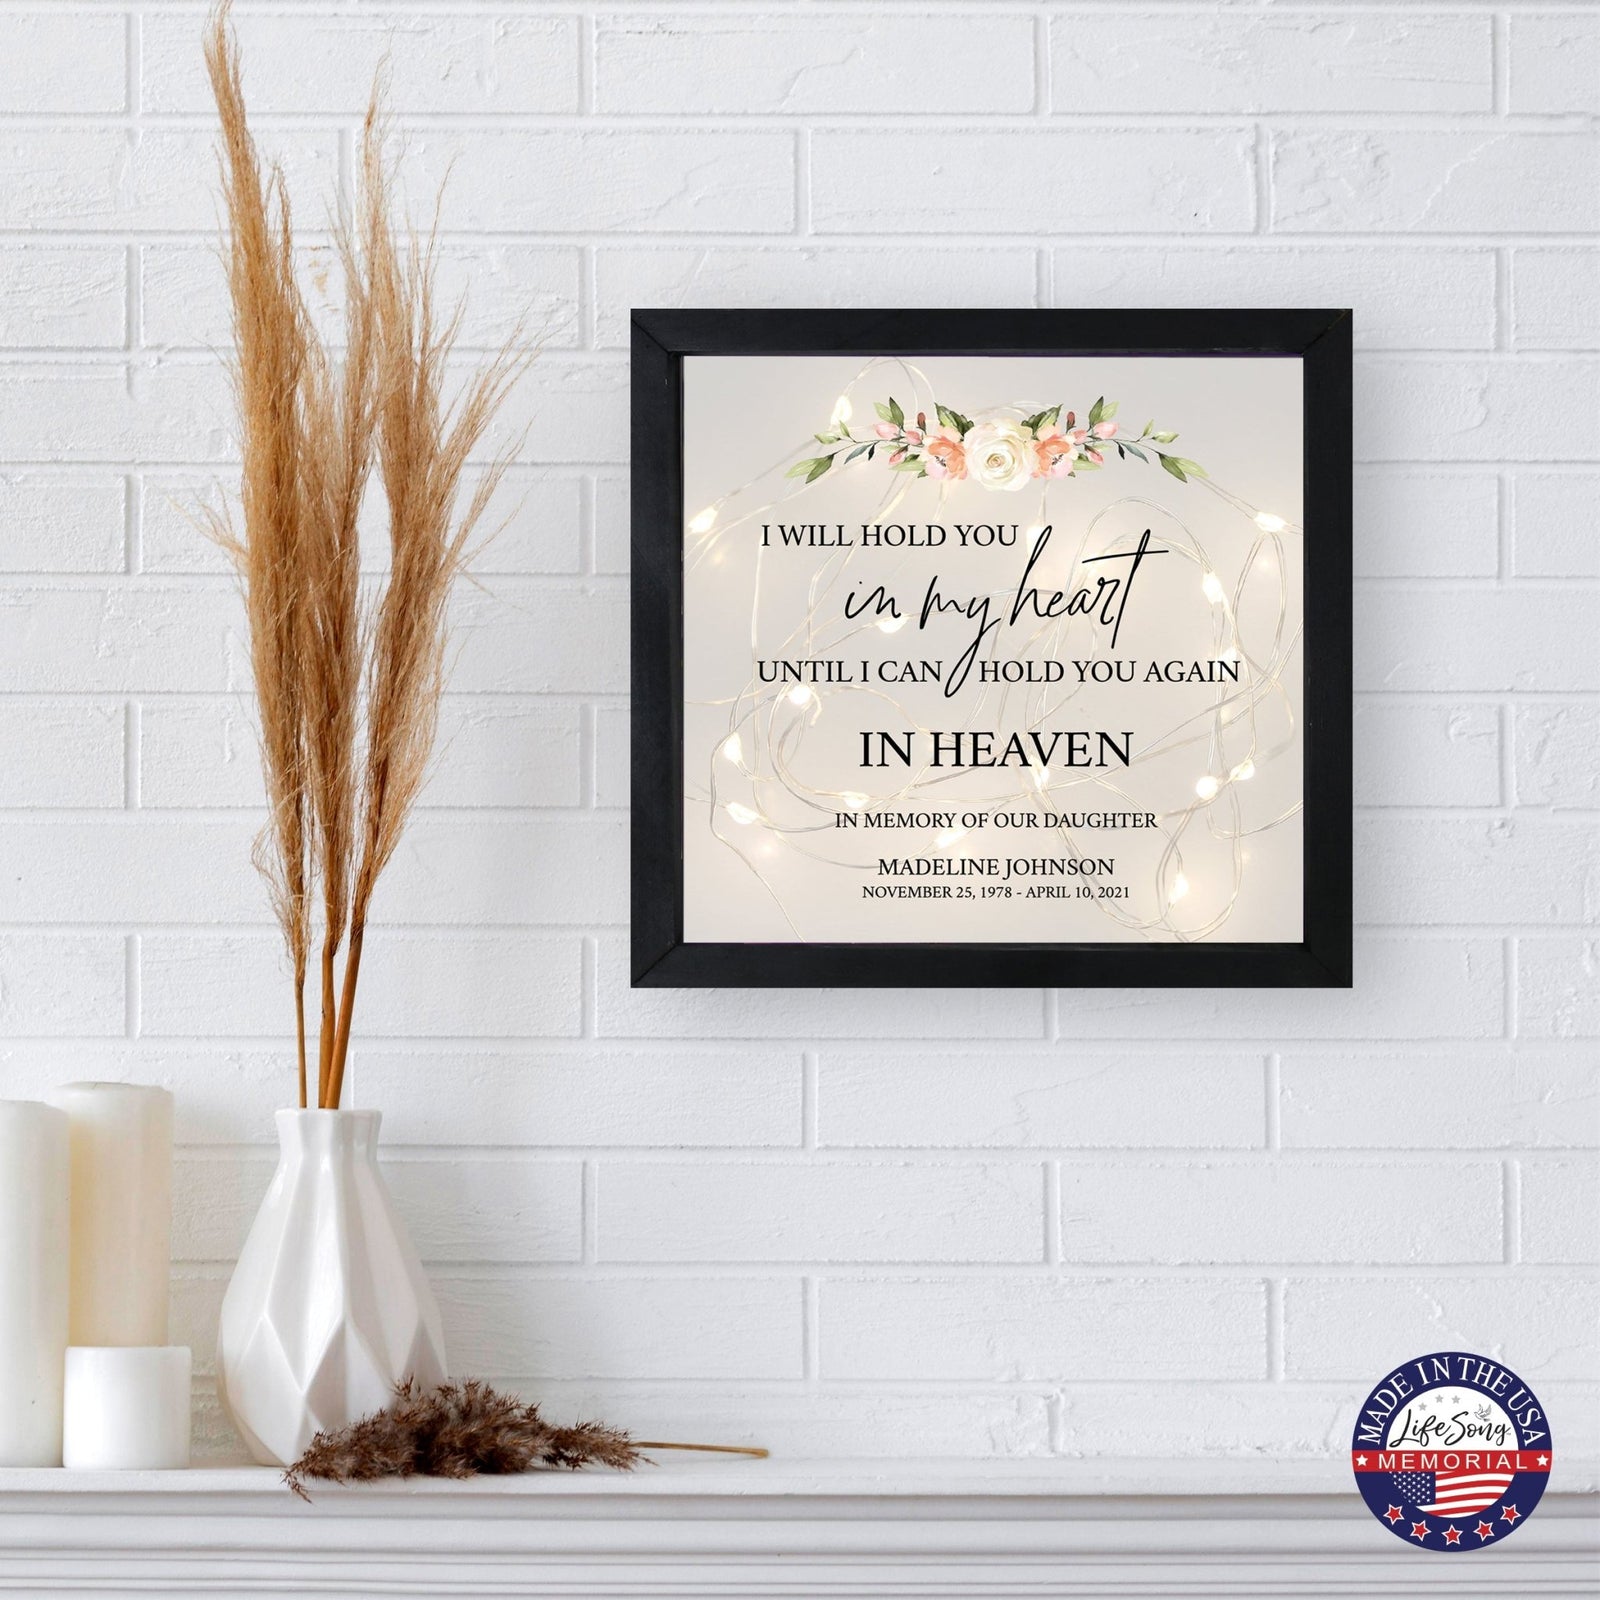 Personalized Memorial Black Framed Shadow Box With Lights Sympathy Gift Wall Décor - I Will Hold You - LifeSong Milestones